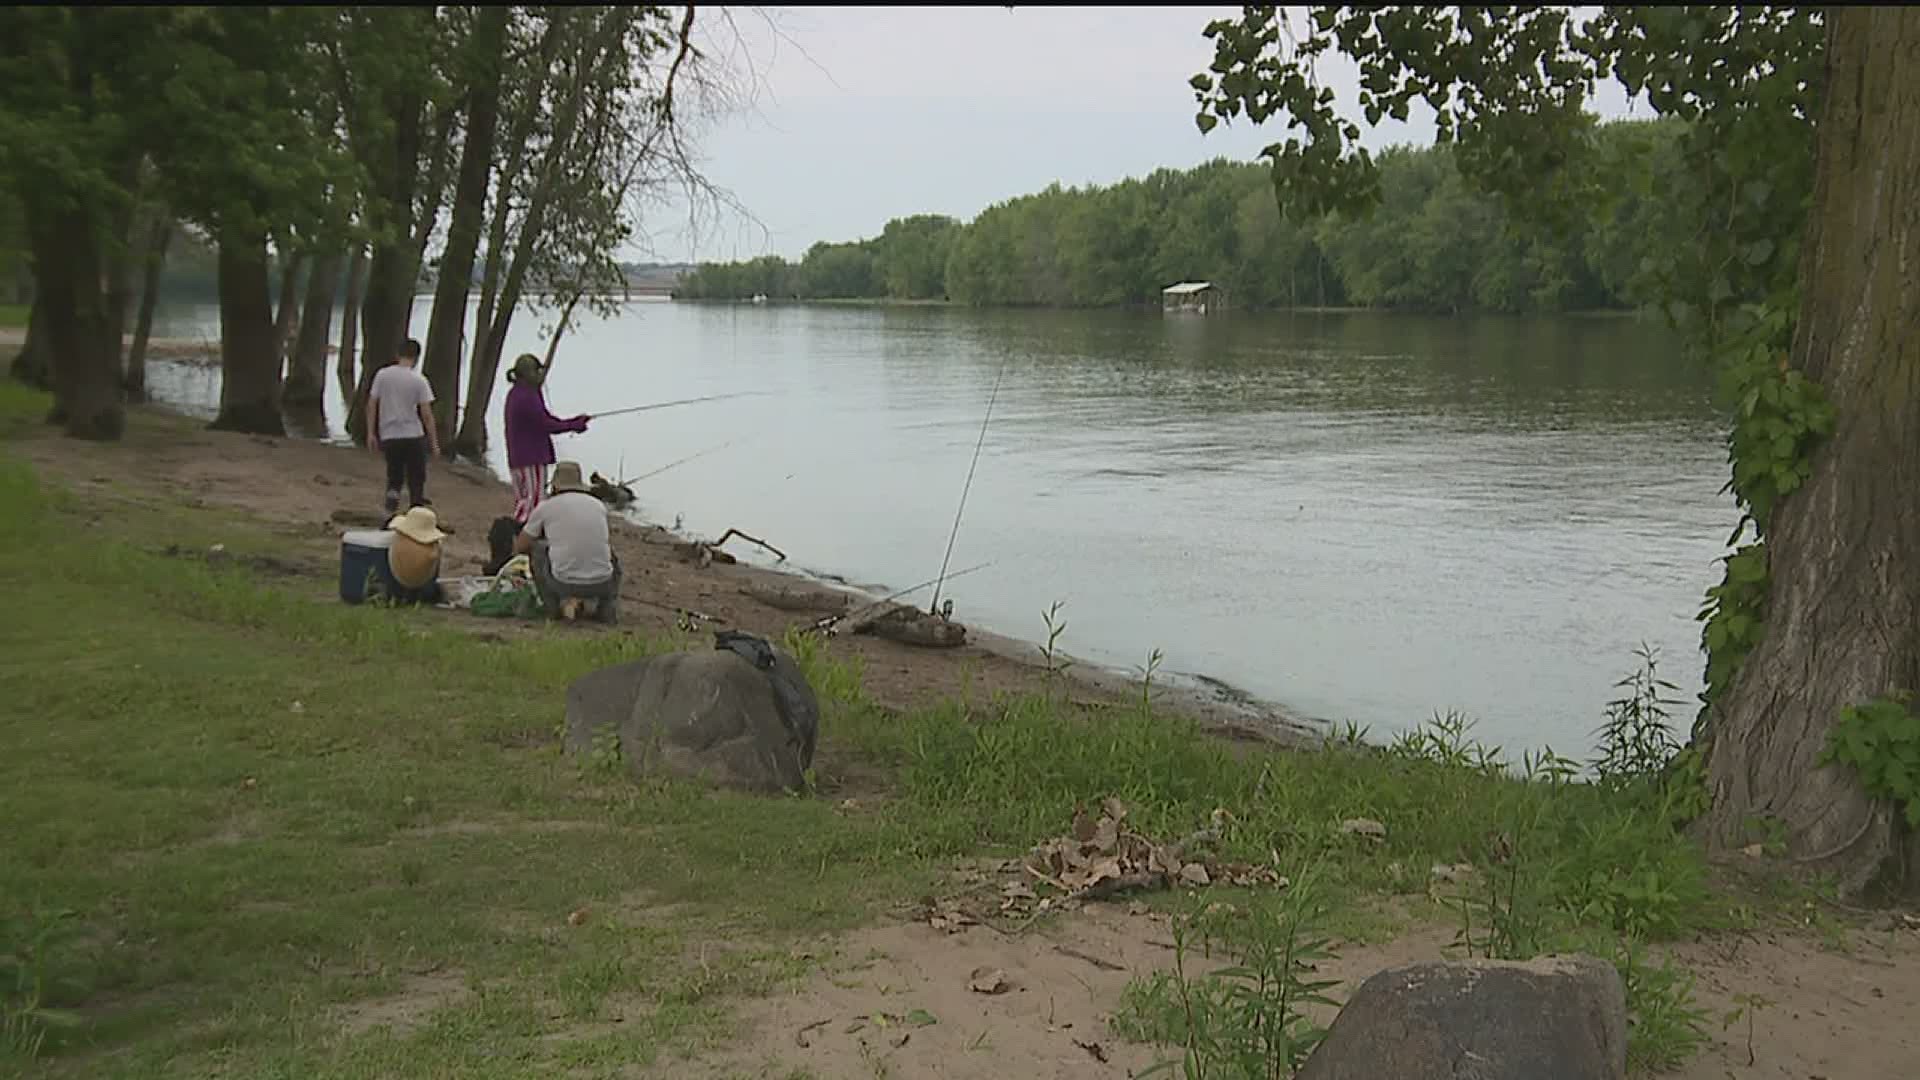 Fishers participate in Free Fish Days in East Moline, Illinois.